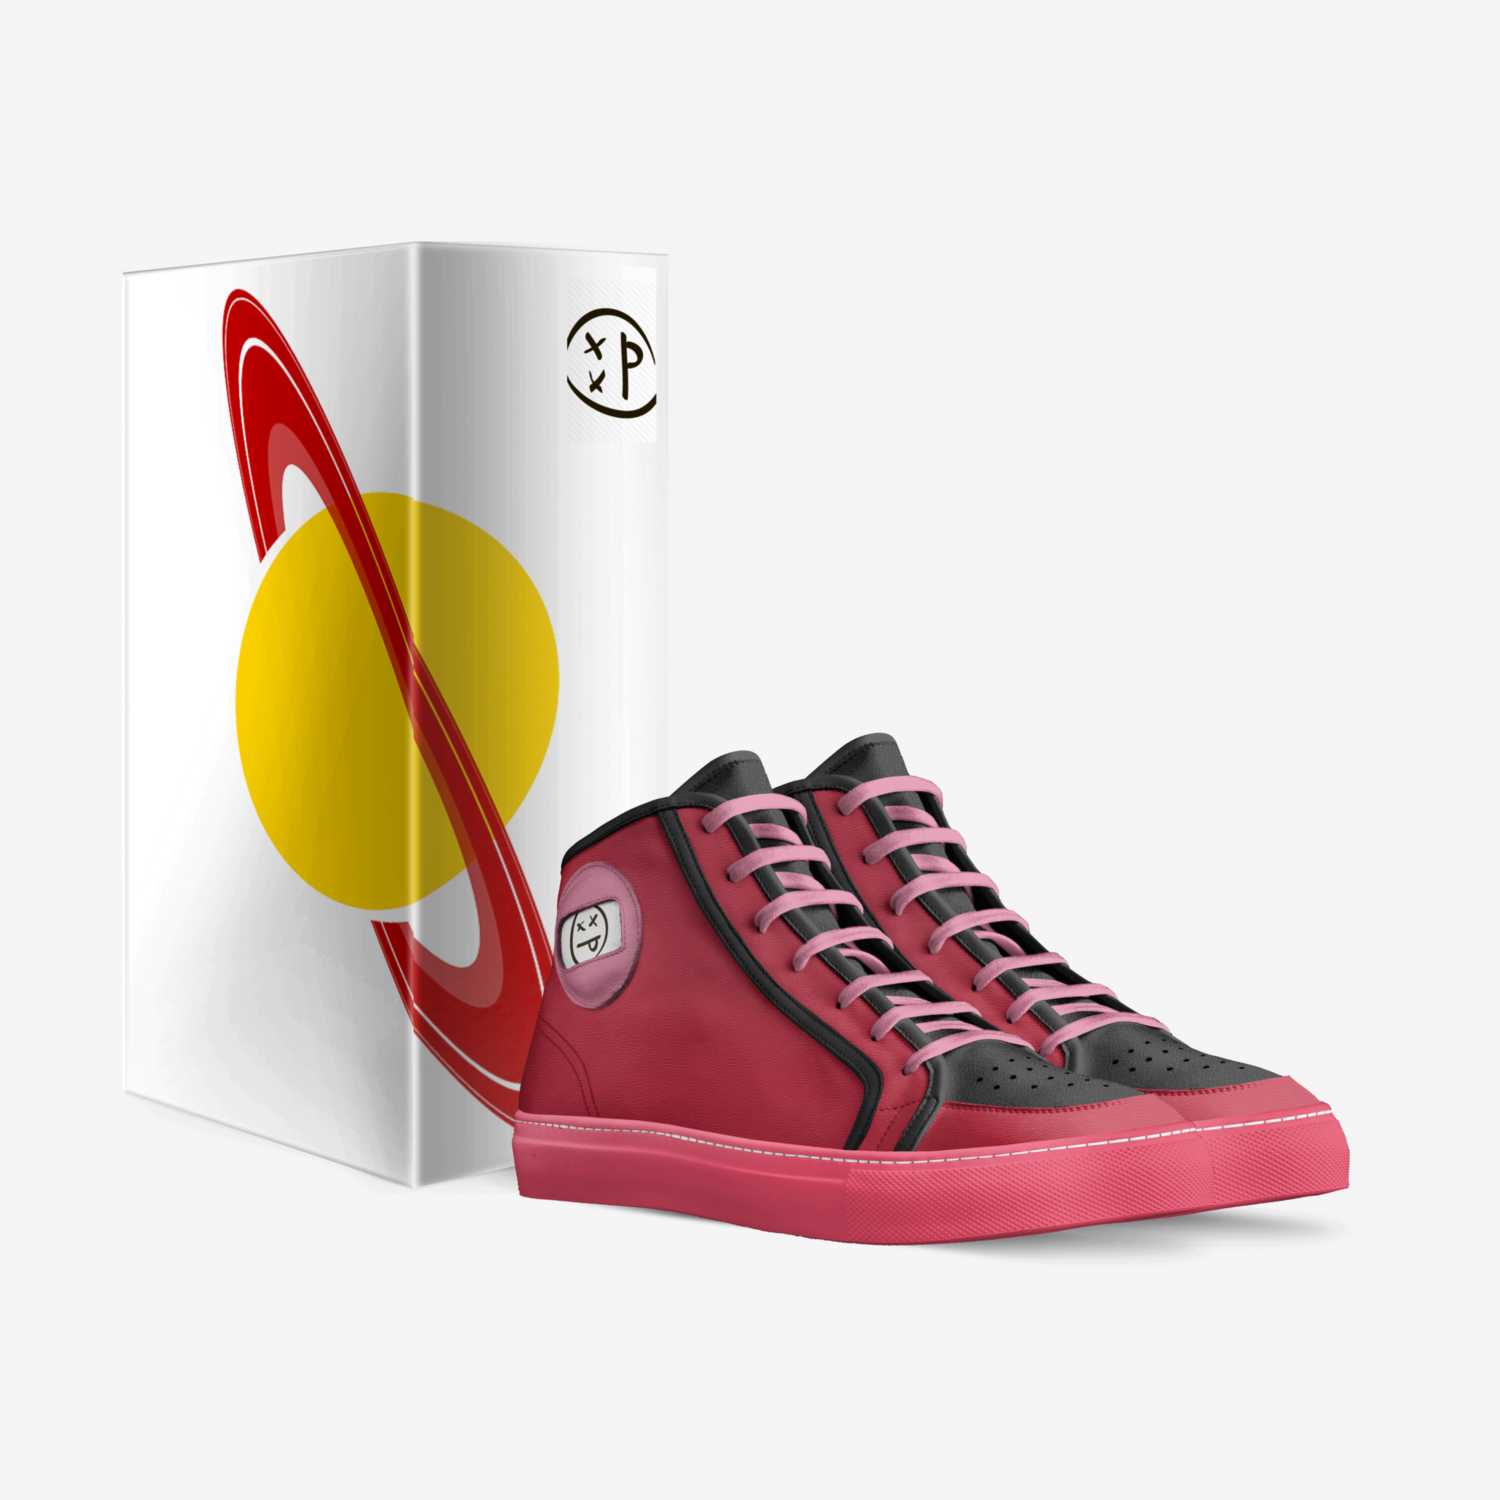 ACID custom made in Italy shoes by Brandon Dunn | Box view